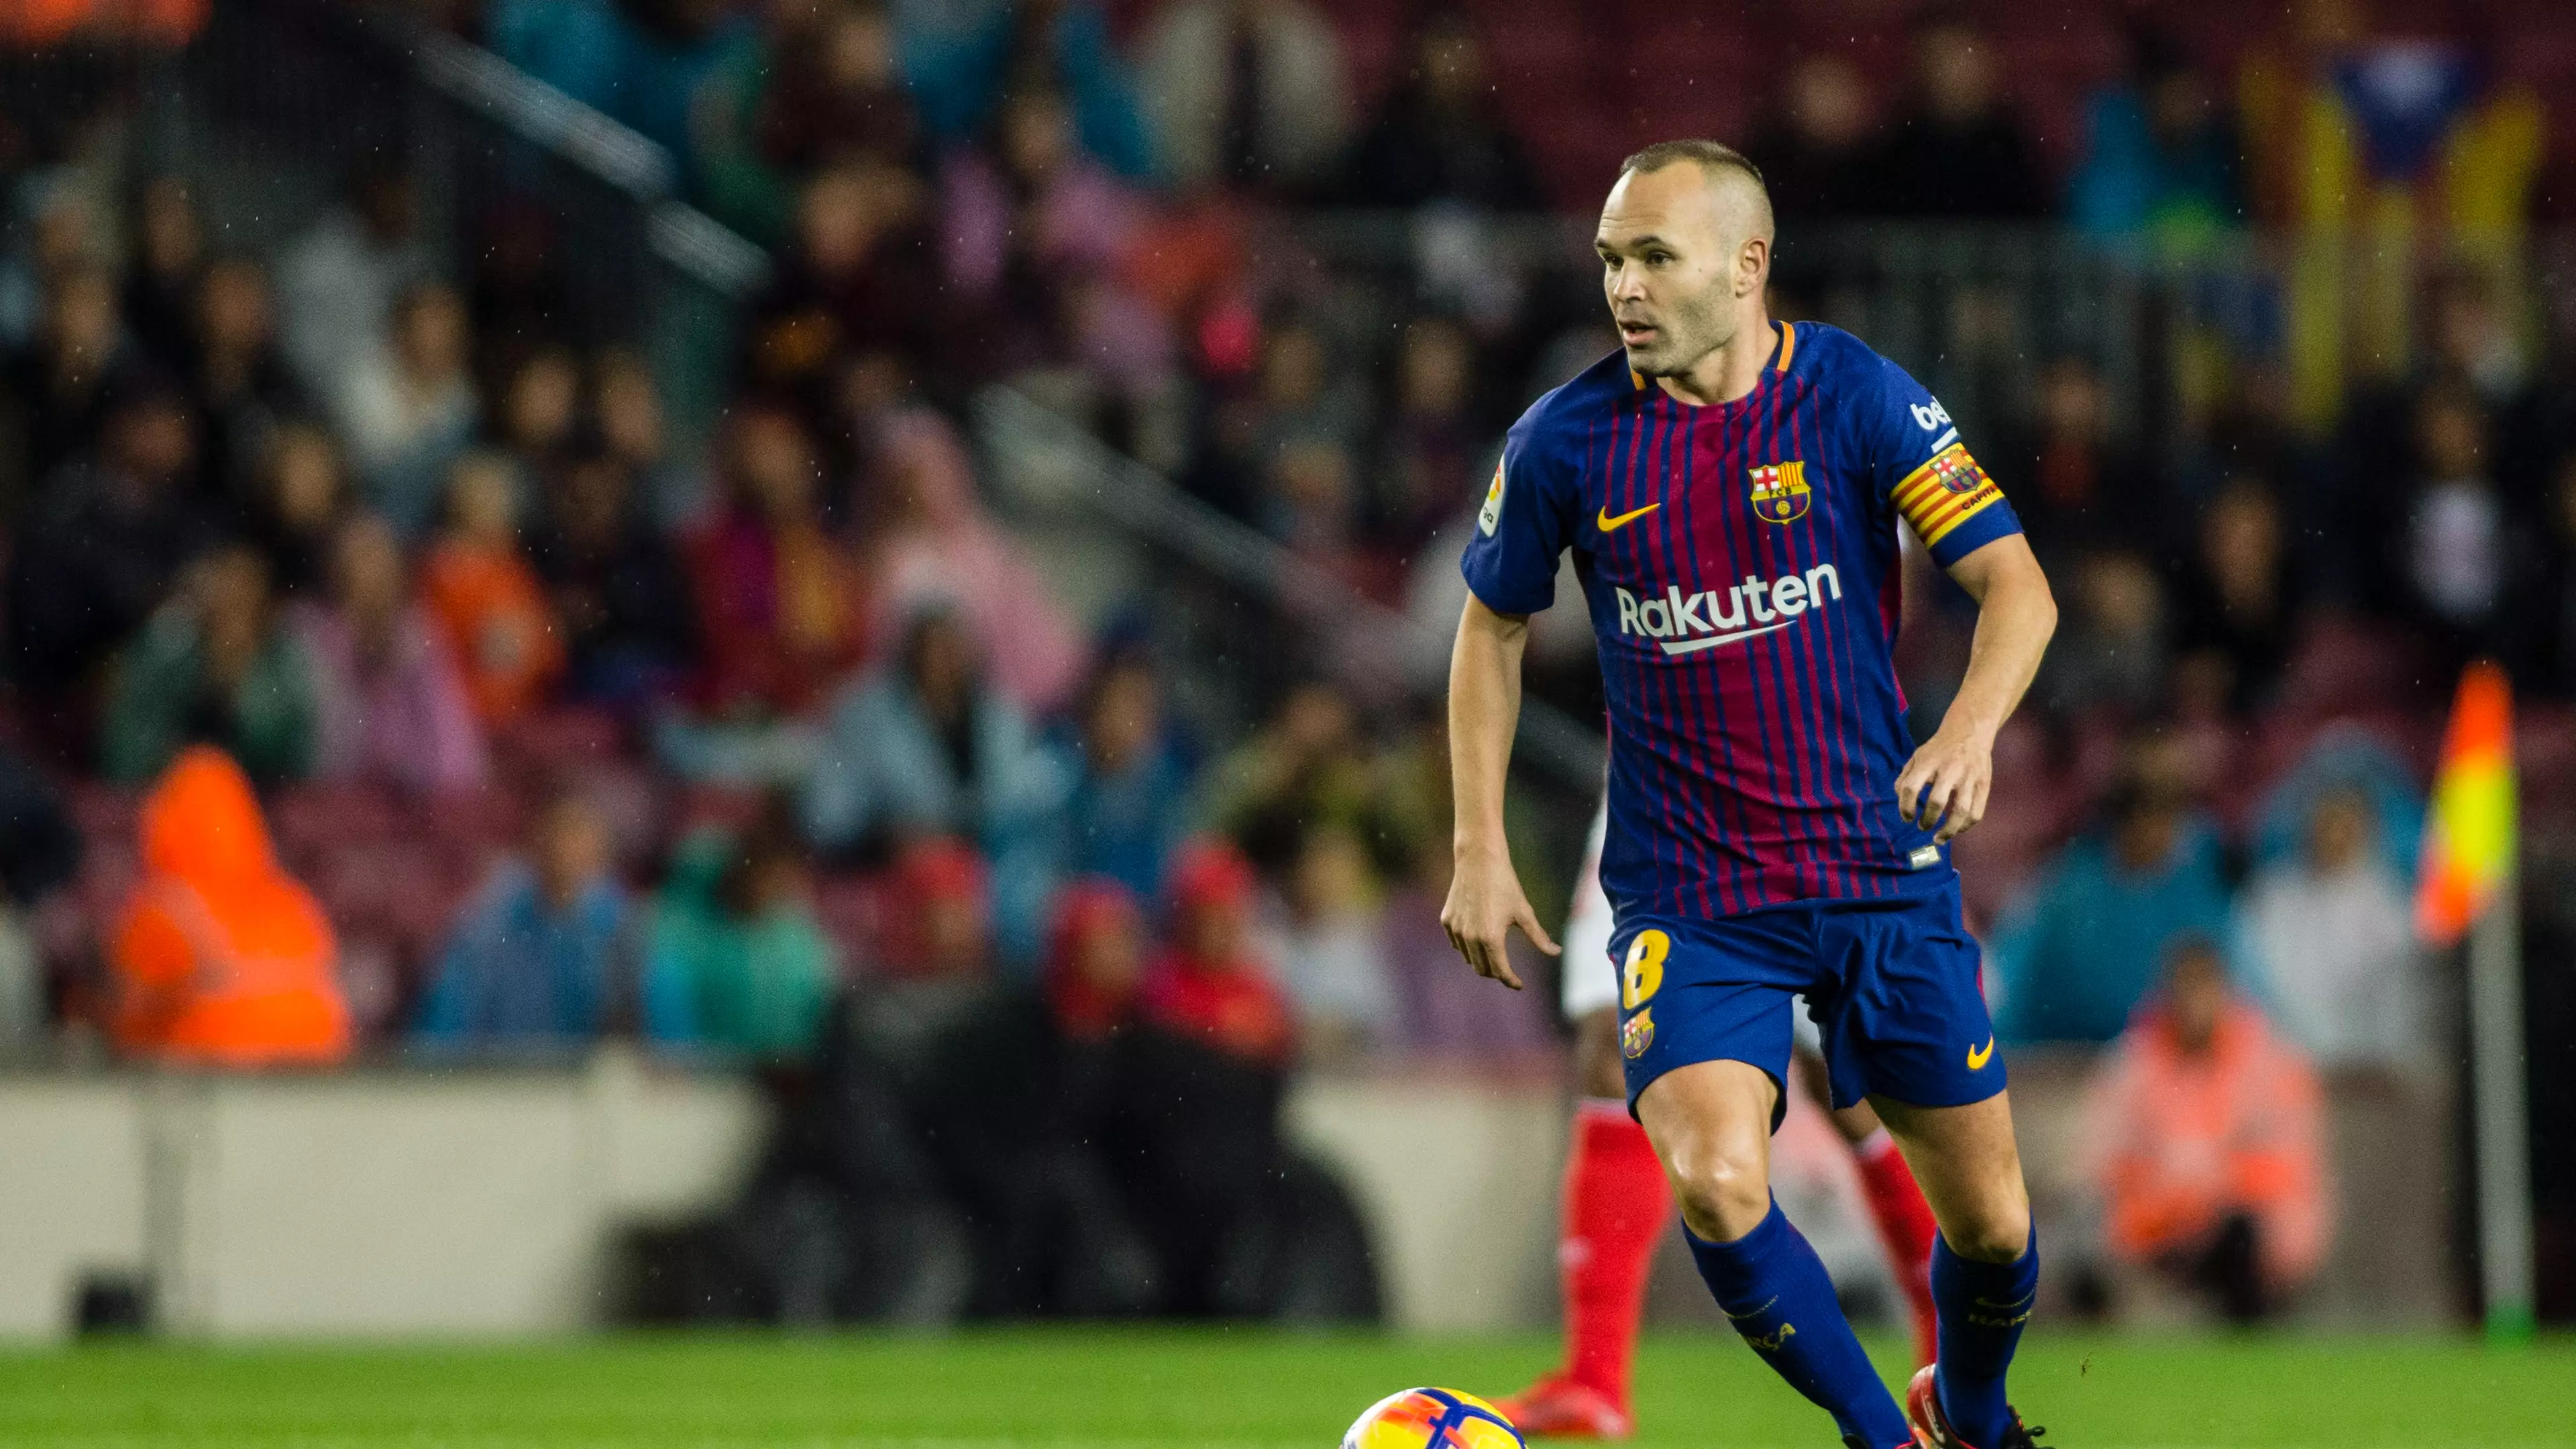 European Giant Tried And Failed To Sign Andres Iniesta